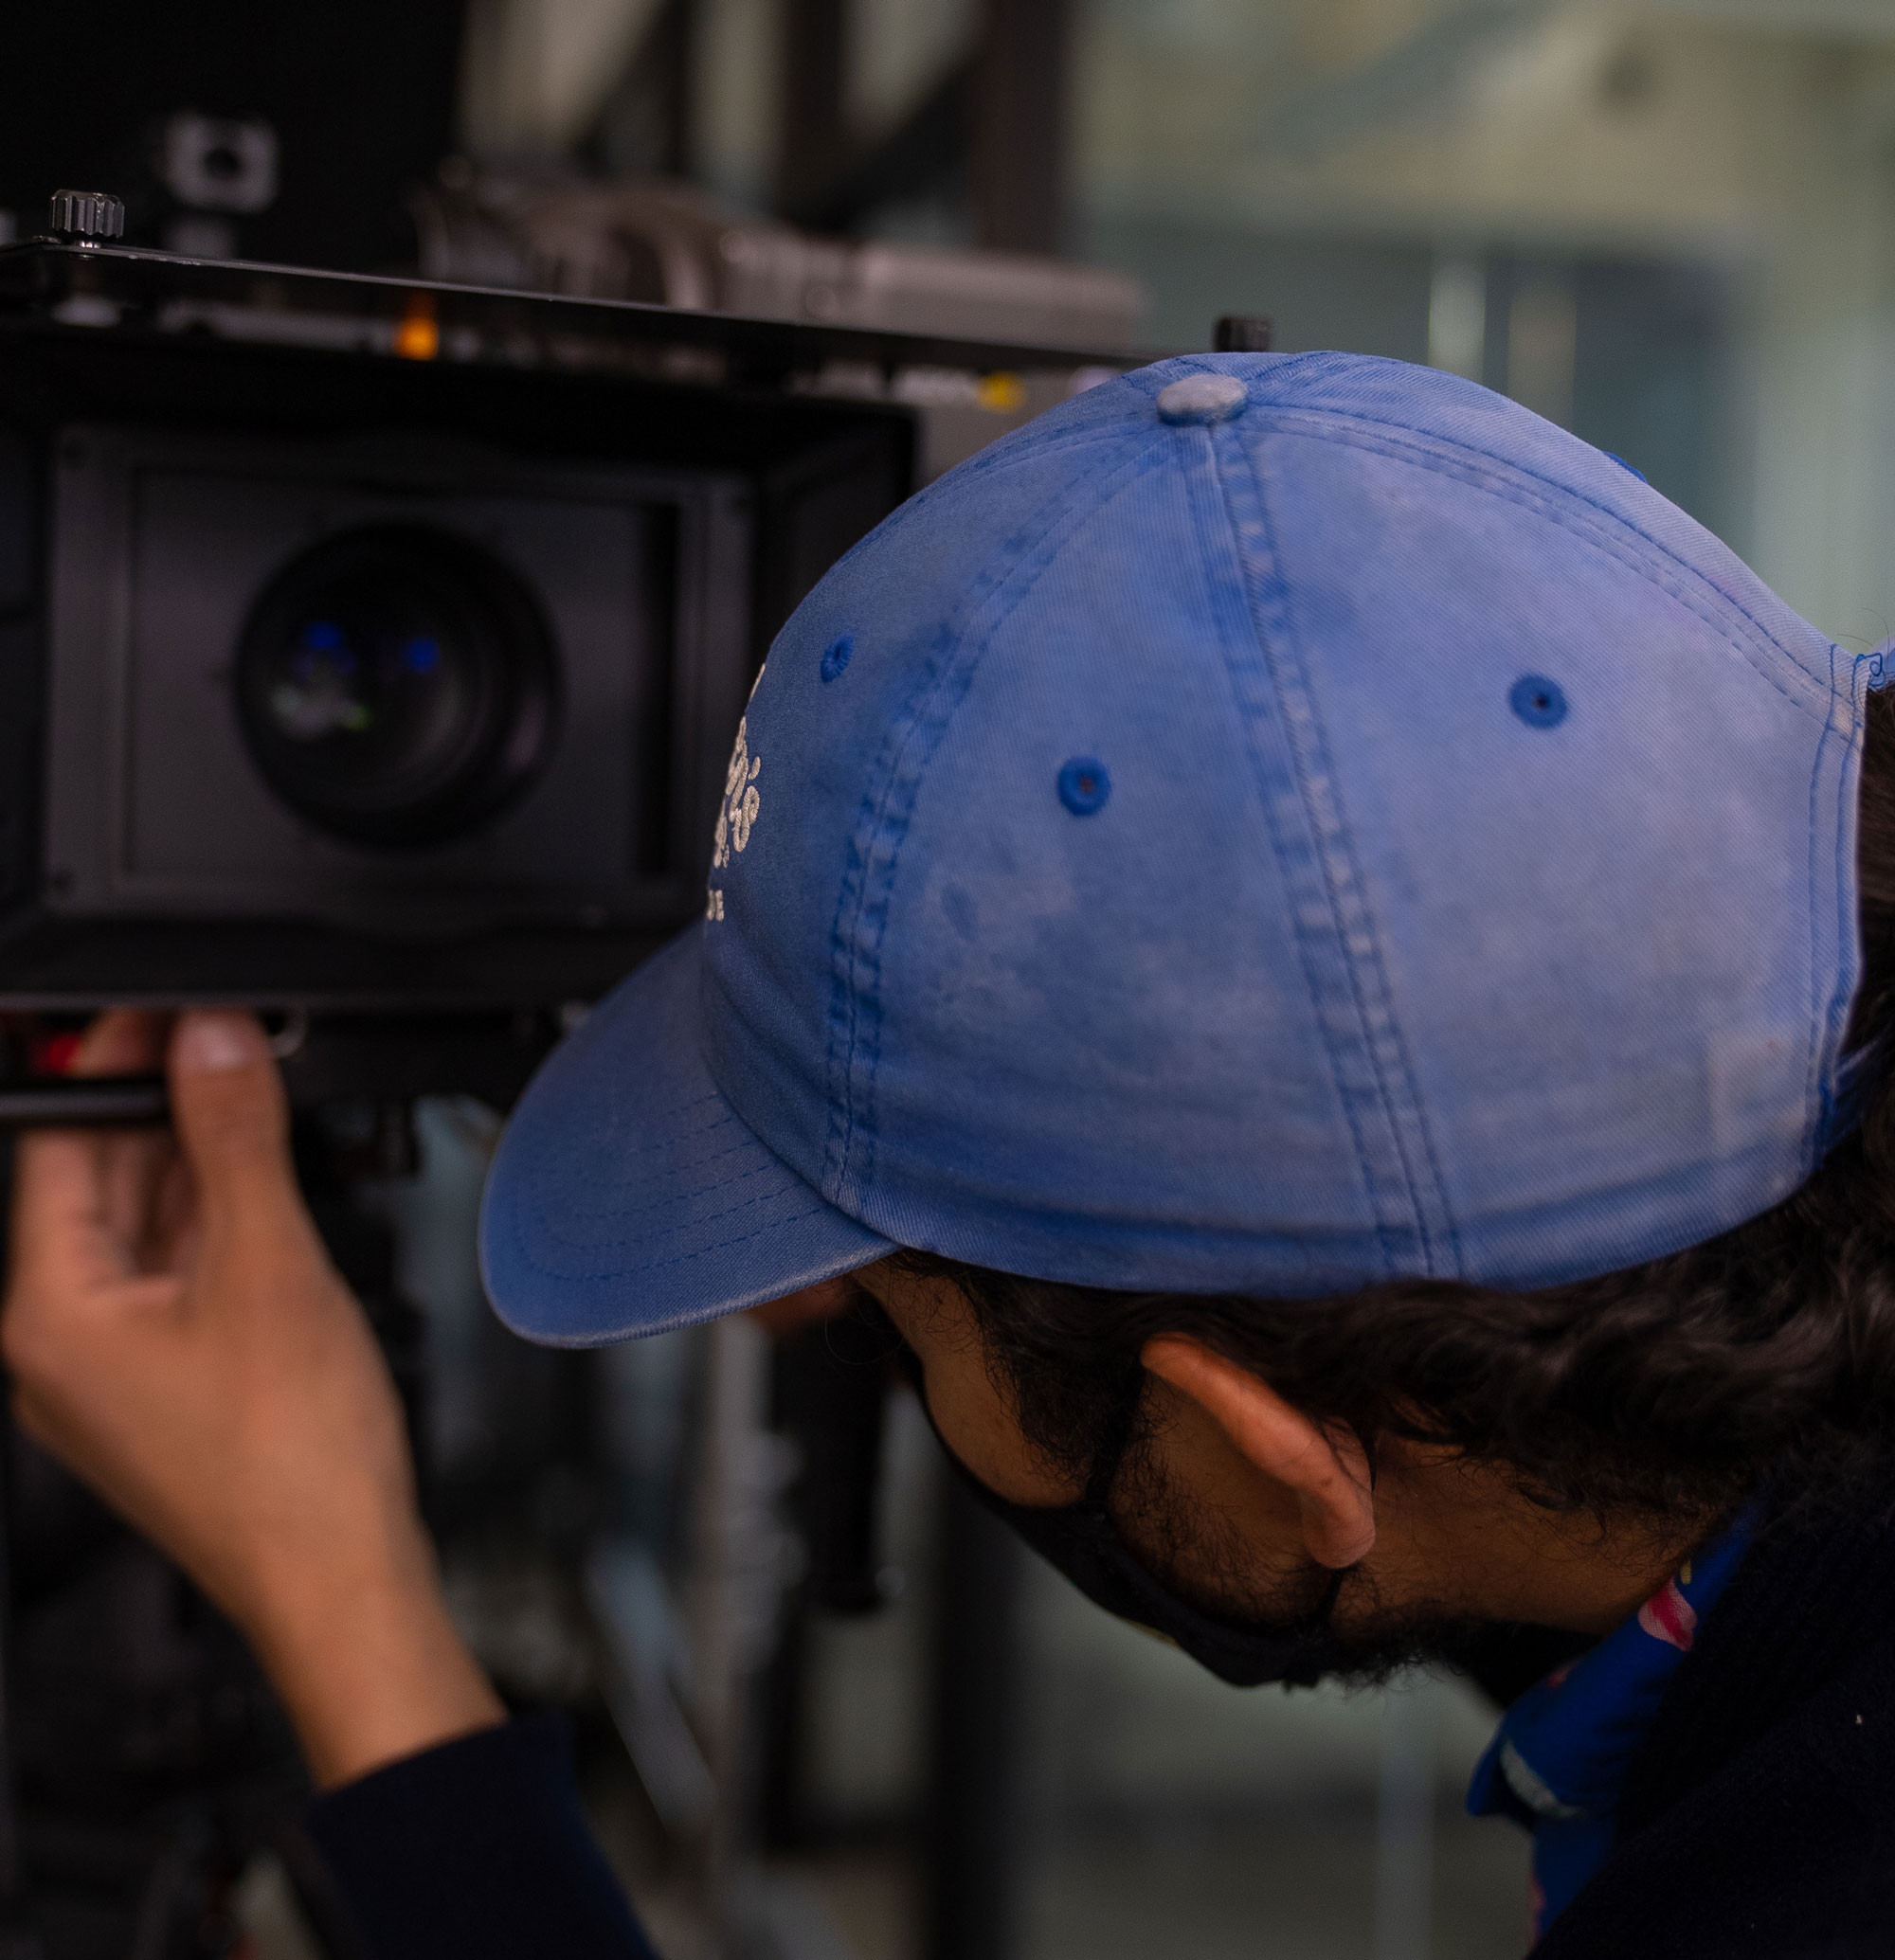 A close-up of a man wearing a hat setting up a video camera